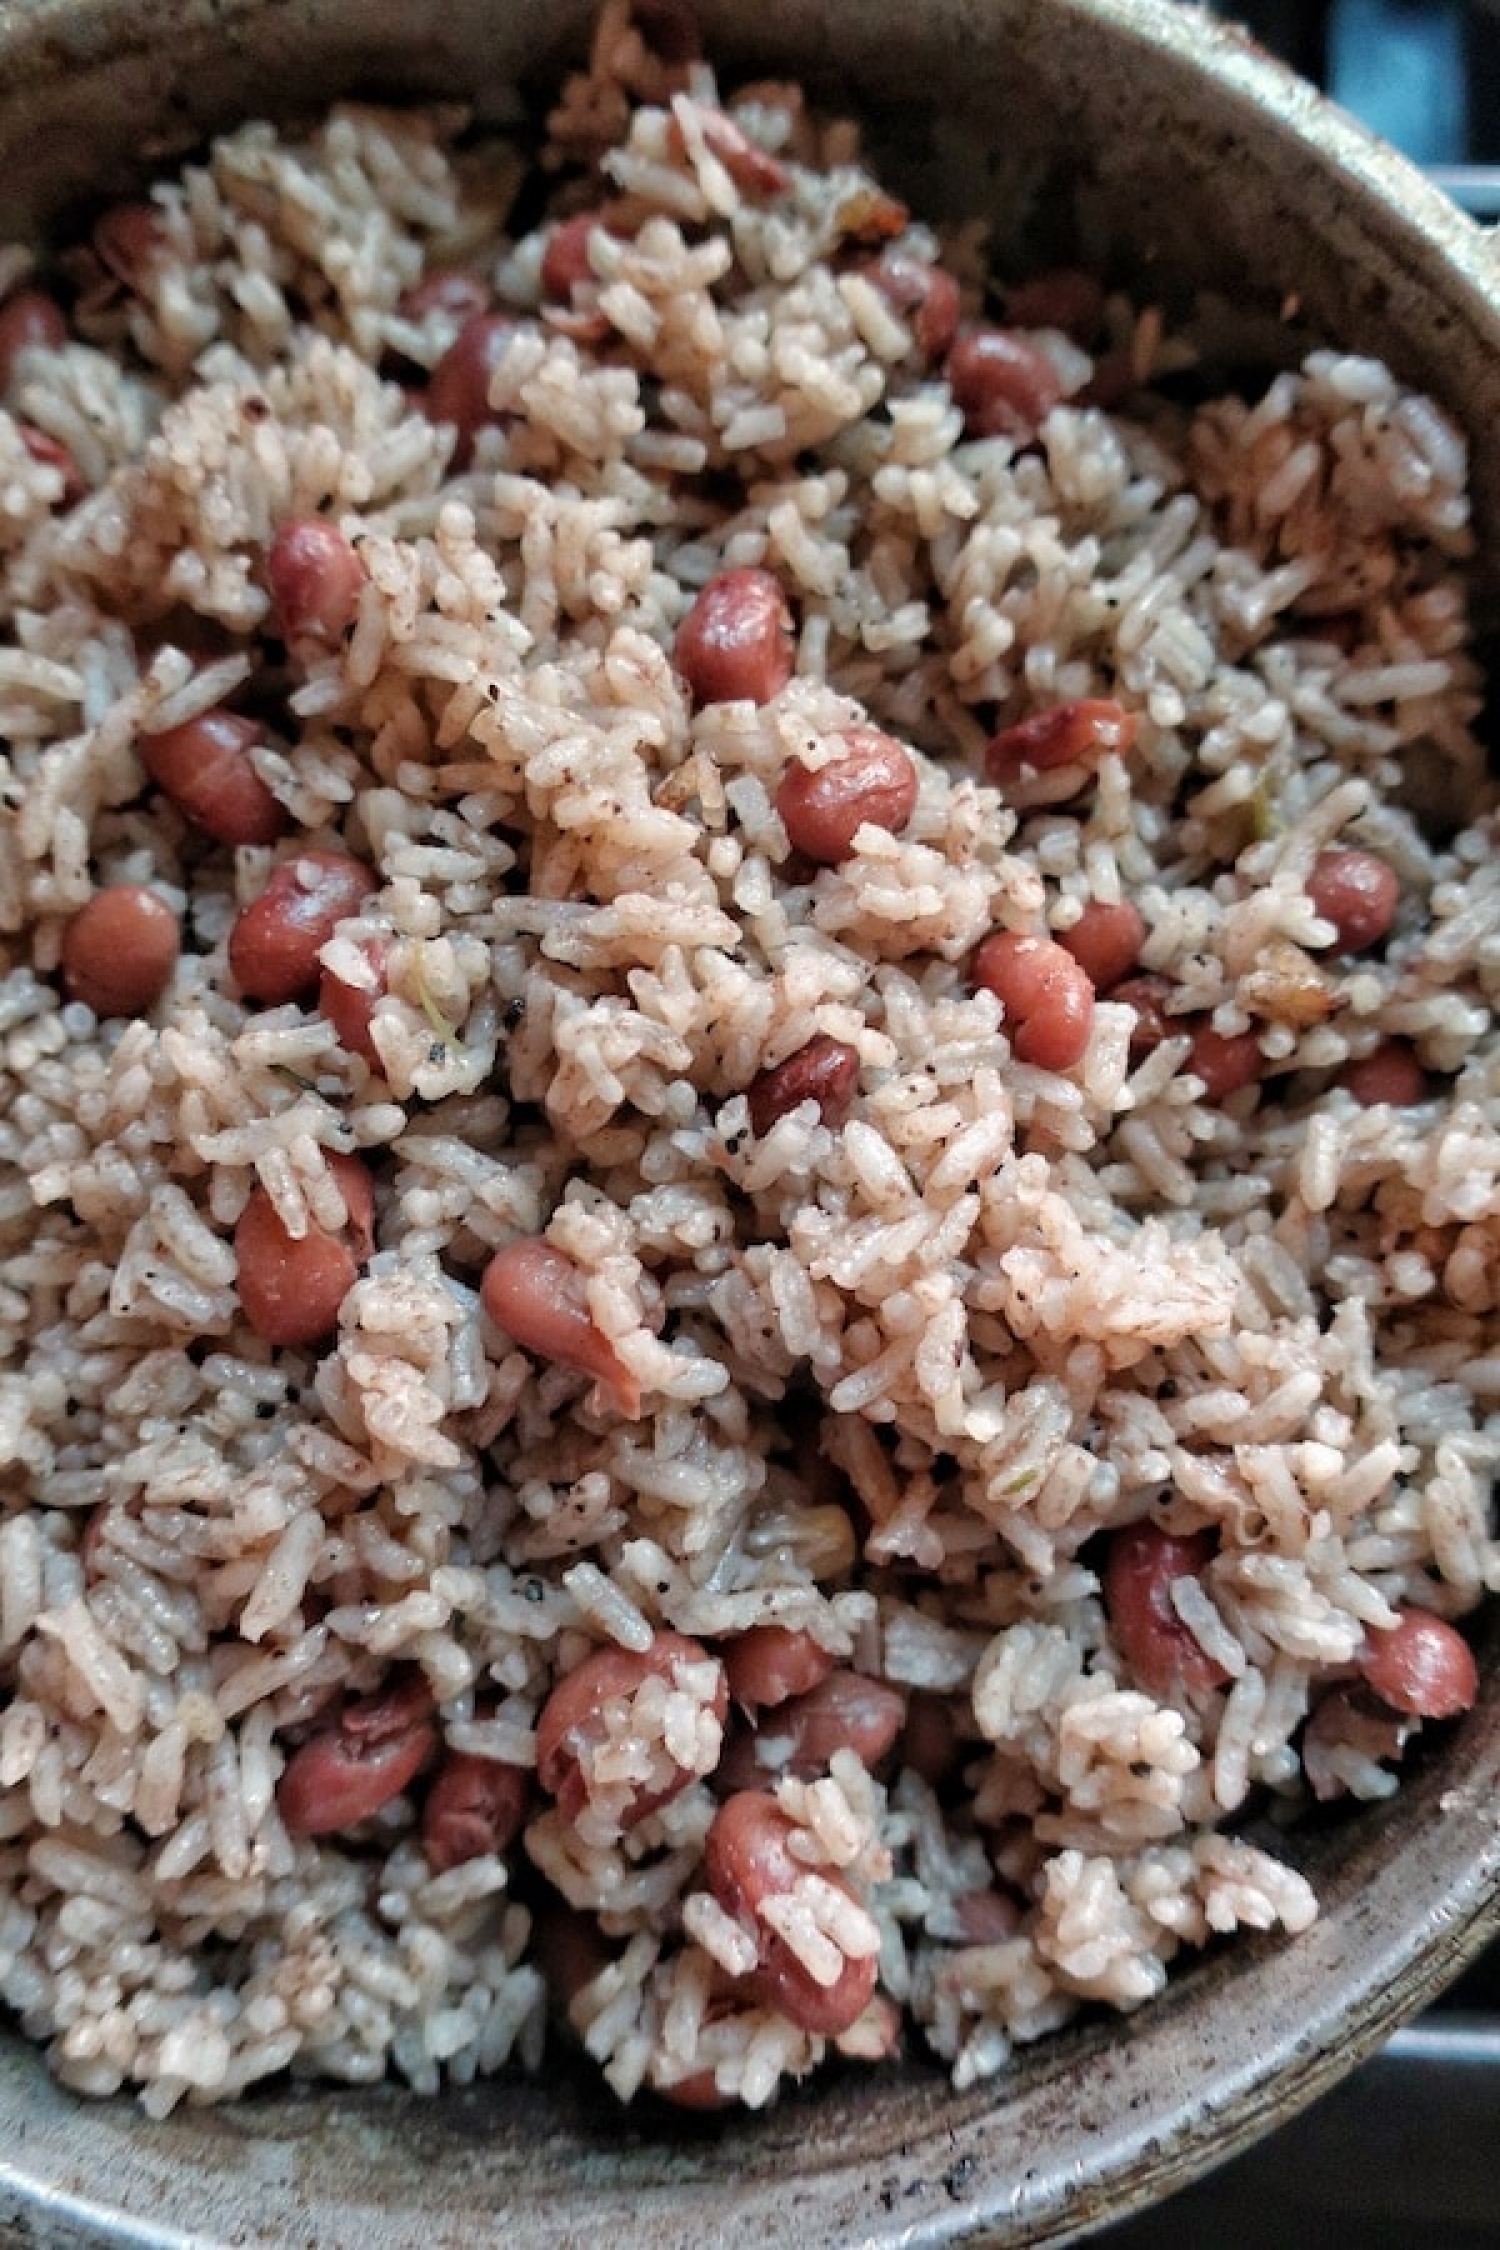 <p>In the mood for some Caribbean flavors? Try <a href="https://www.fromthecomfortofmybowl.com/jamaican-rice-and-peas/" rel="noopener">this recipe</a> for authentic Jamaican rice and peas (in Jamaica, beans are referred to as 'peas'), made with kidney beans, coconut milk, jerk seasoning and other fragrant spices.</p>